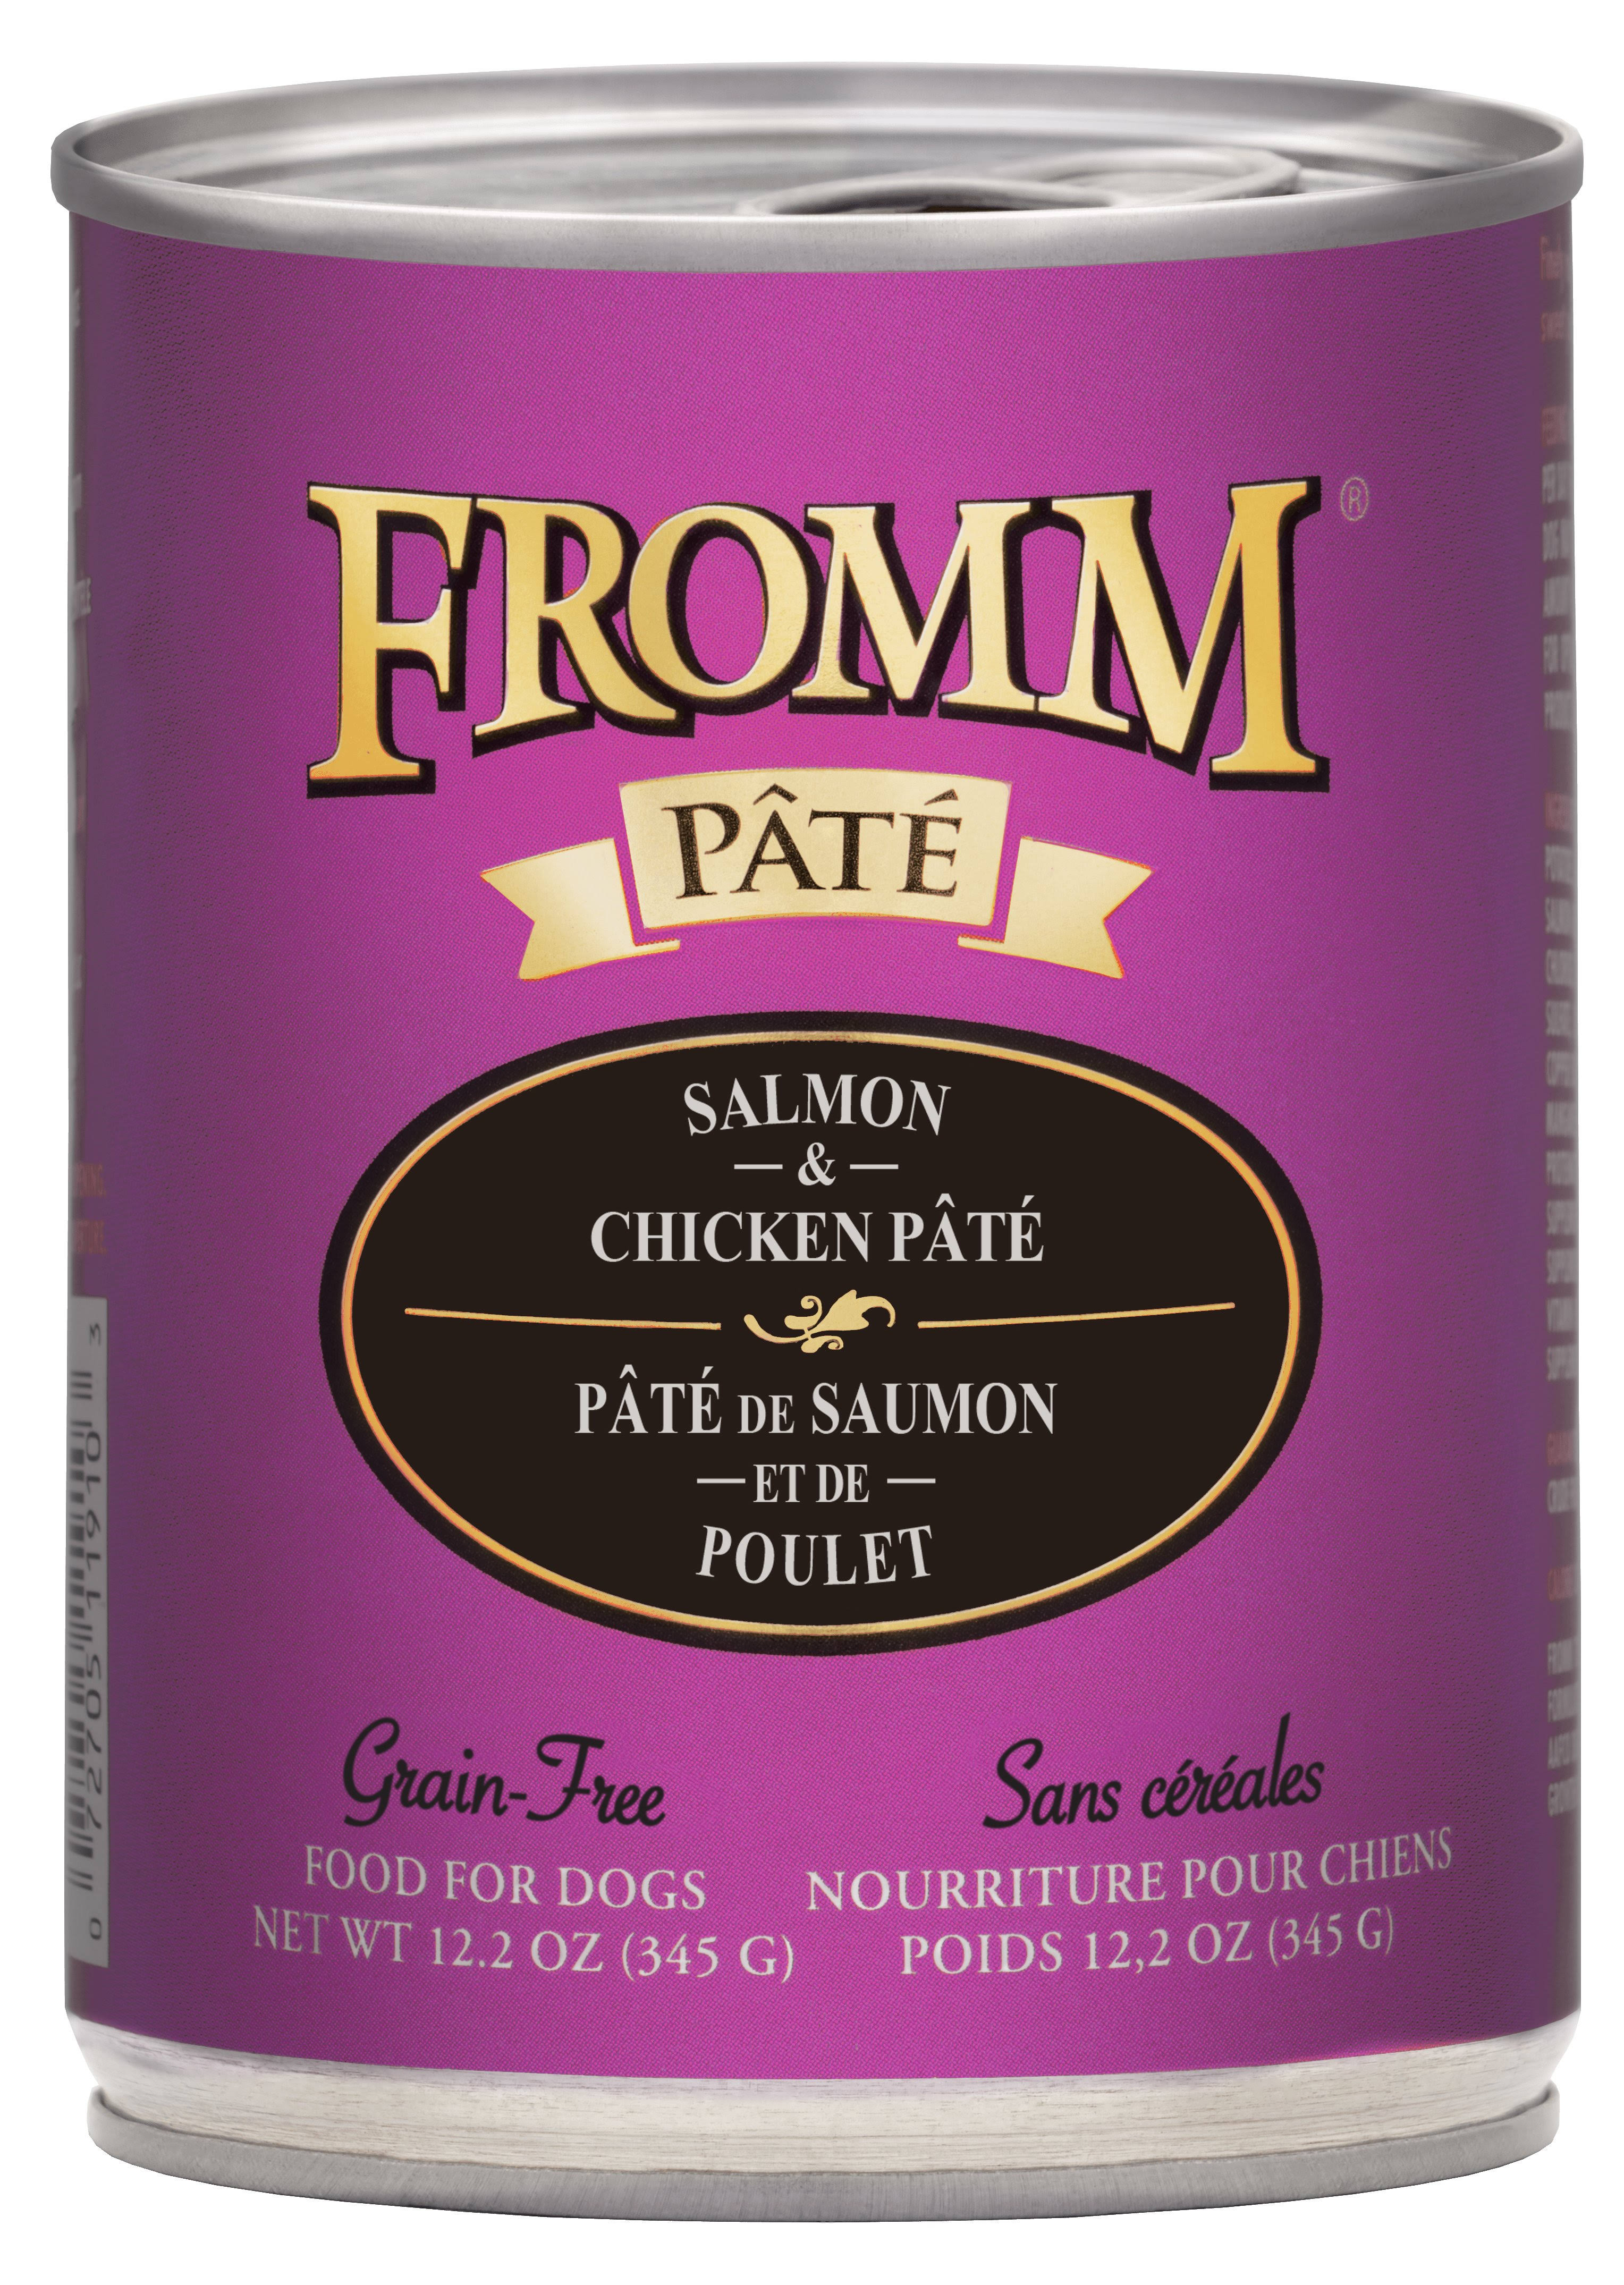 Fromm Salmon & Chicken Pate Dog Food 12.2oz